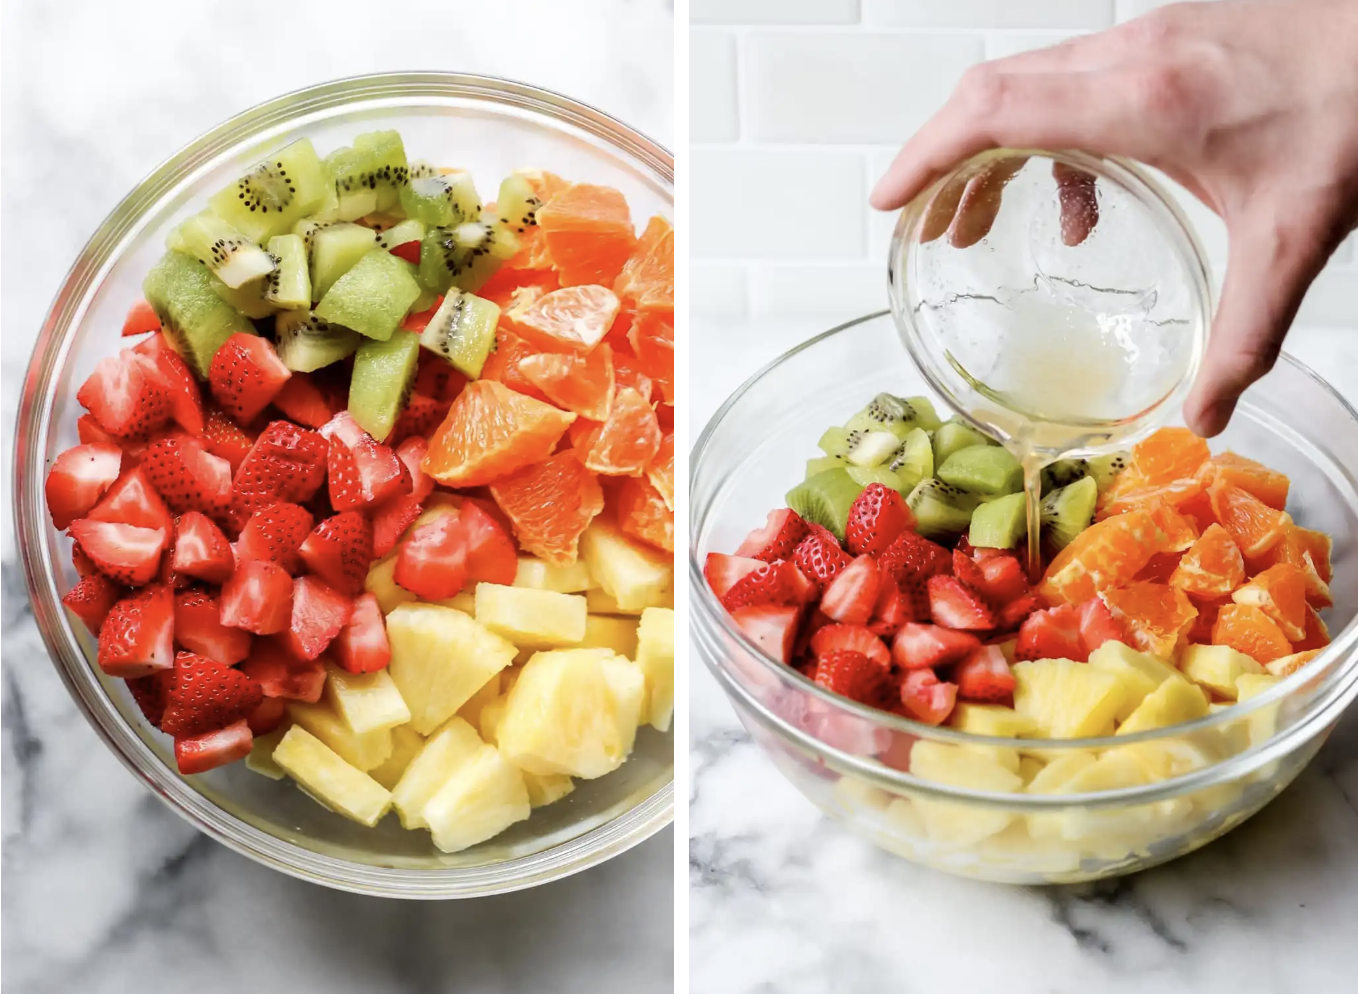 A fruit salad bowl with kiwi, orange, strawberries, and pineapple, and a hand pouring liquid from a small bowl into it